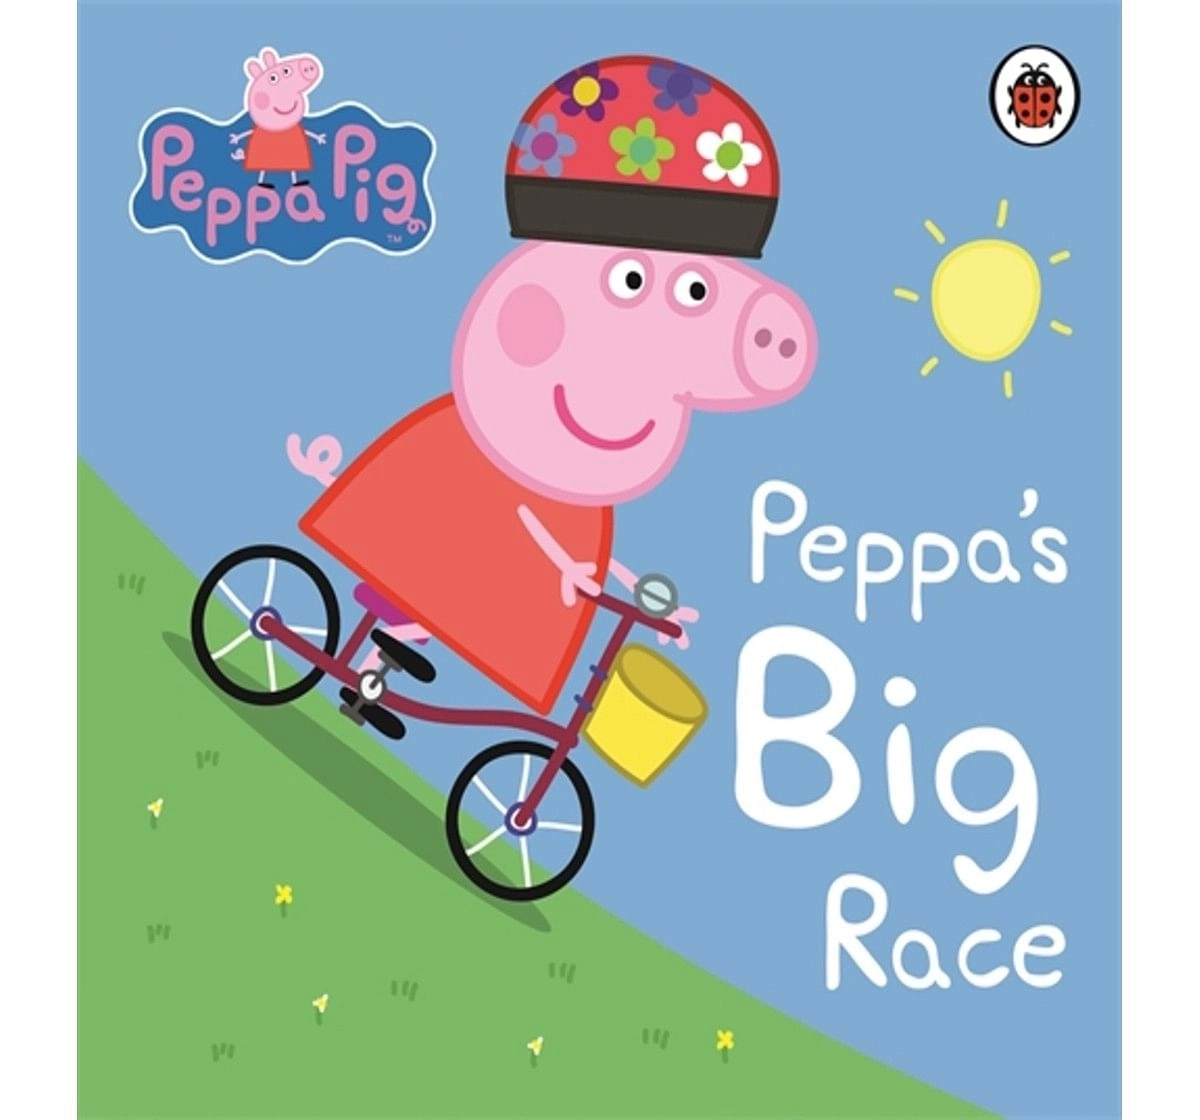 Peppa Pig : Peppa's Big Race, 16 Pages Book by Ladybird, Board Book